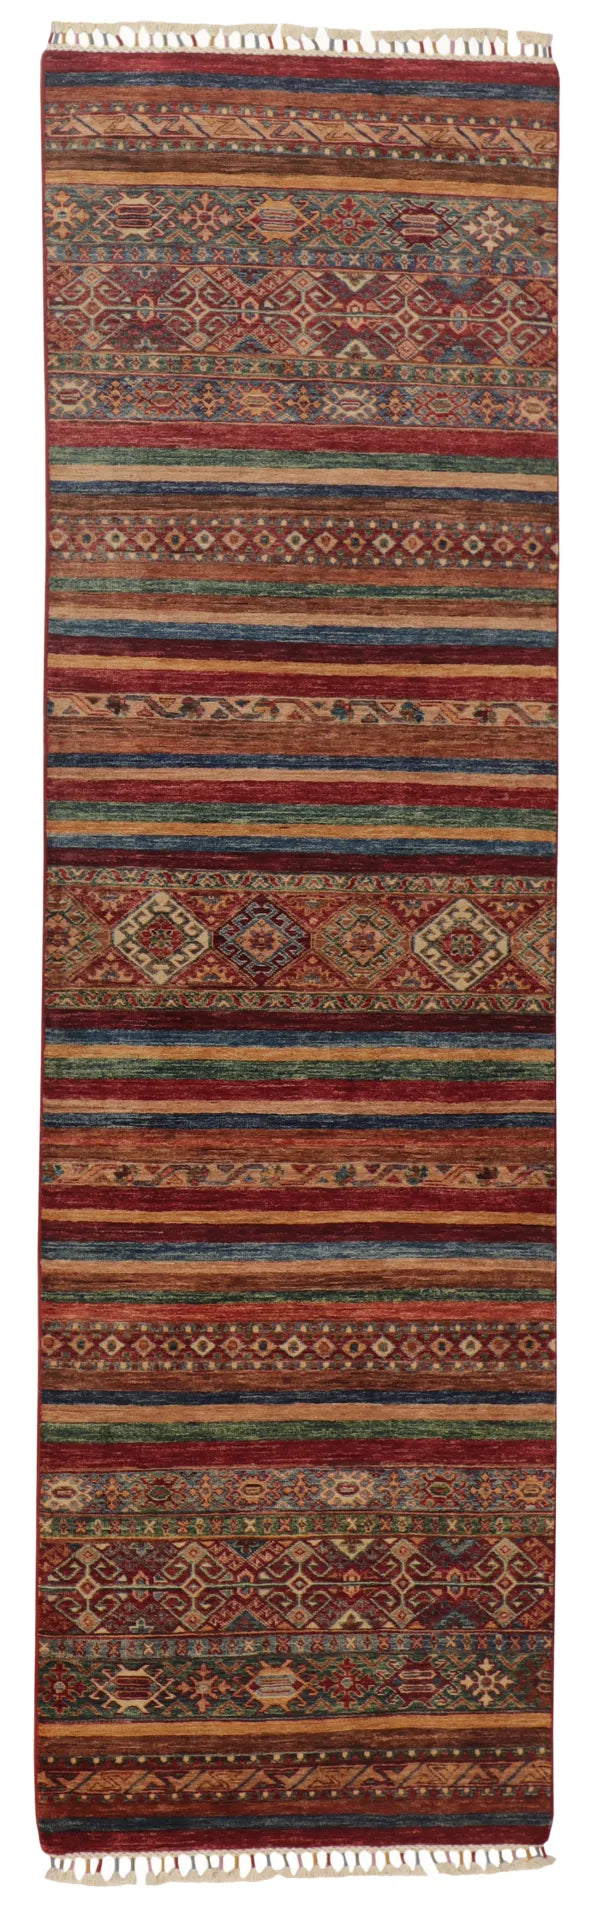 Runner - Baluch Fine/Wool All Over Rectangle - Hand Knotted Rug